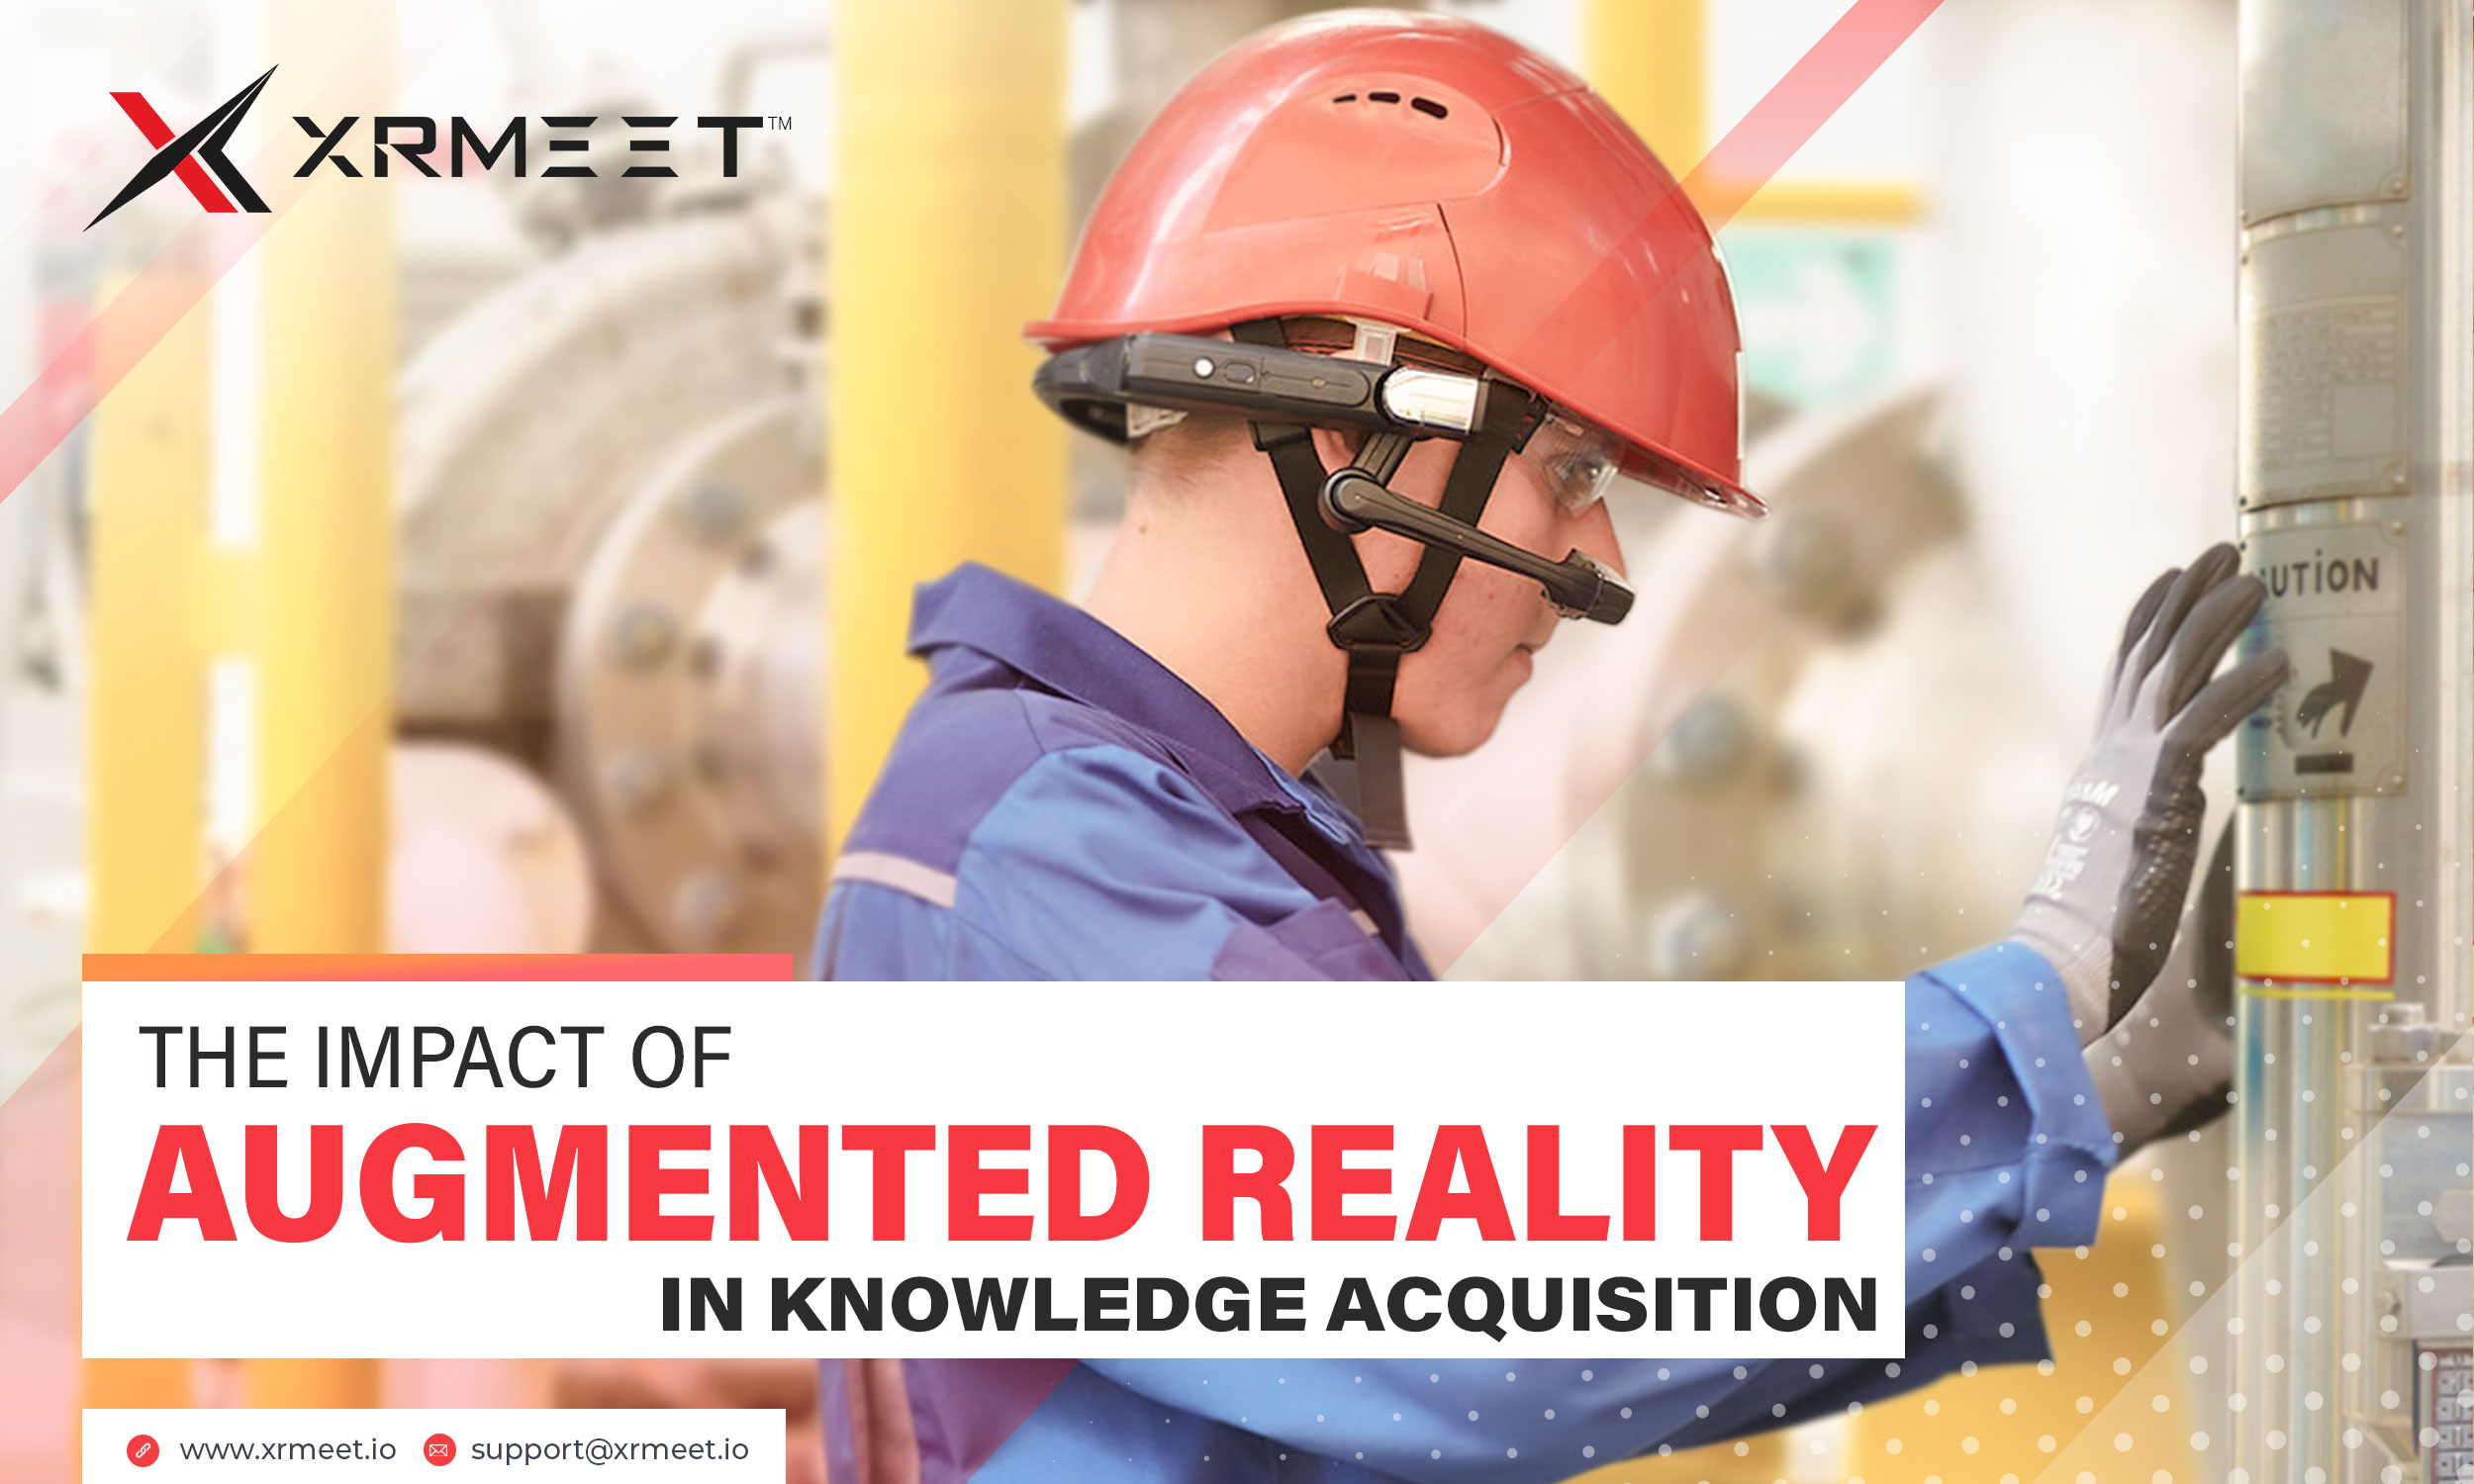 Augmented reality in knowledge acquisition